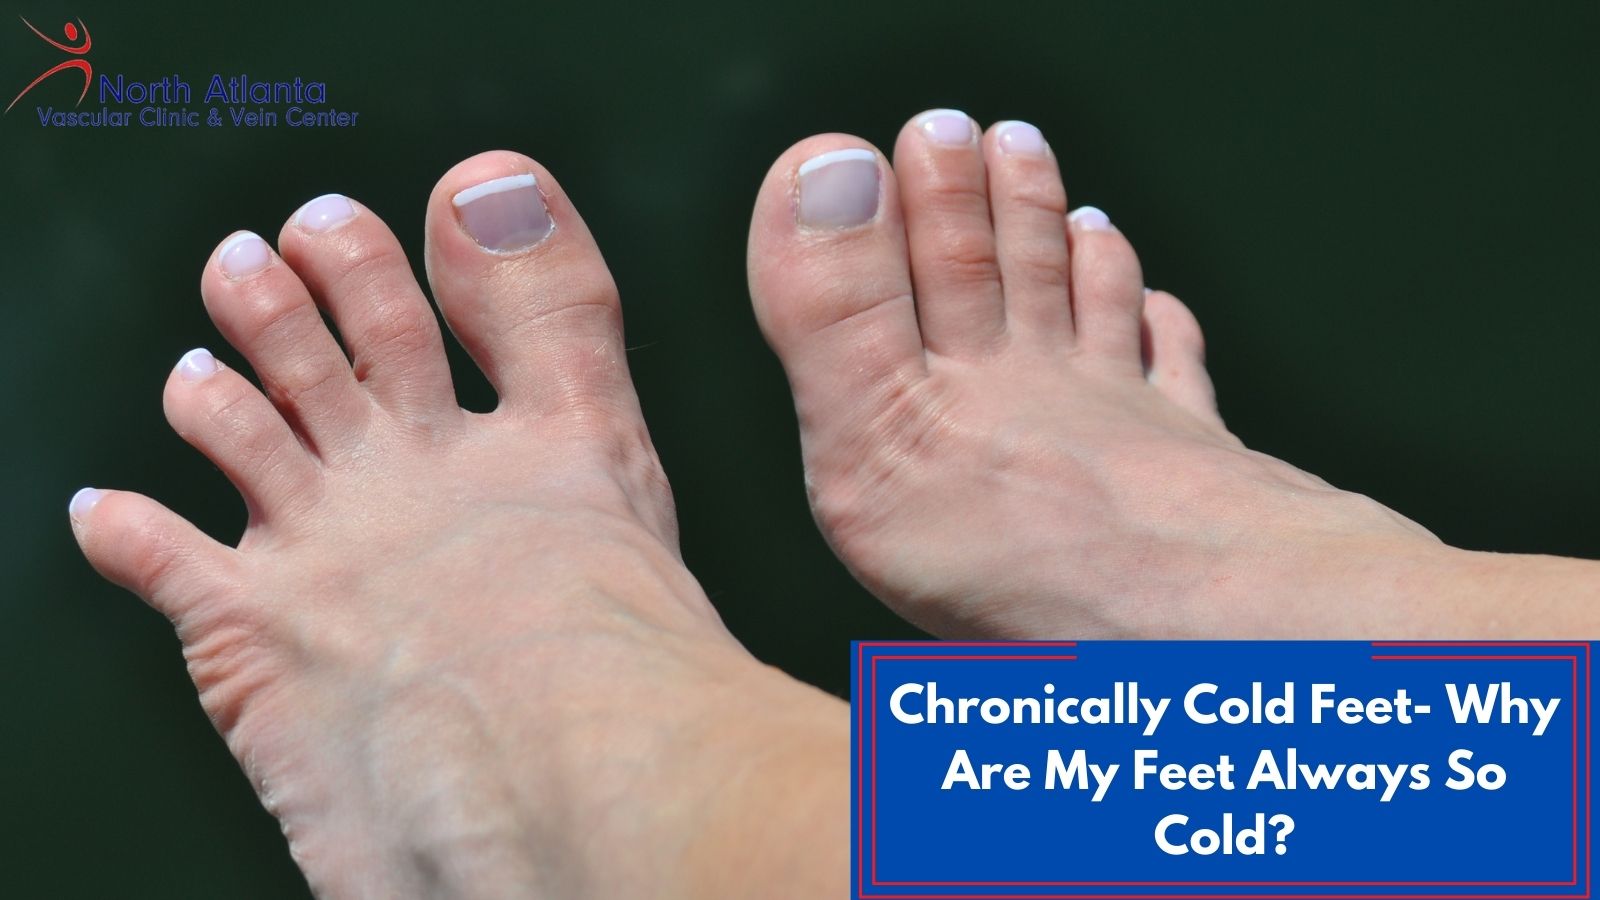 Cold Feet - Five Major Causes of Persistently Cold Feet